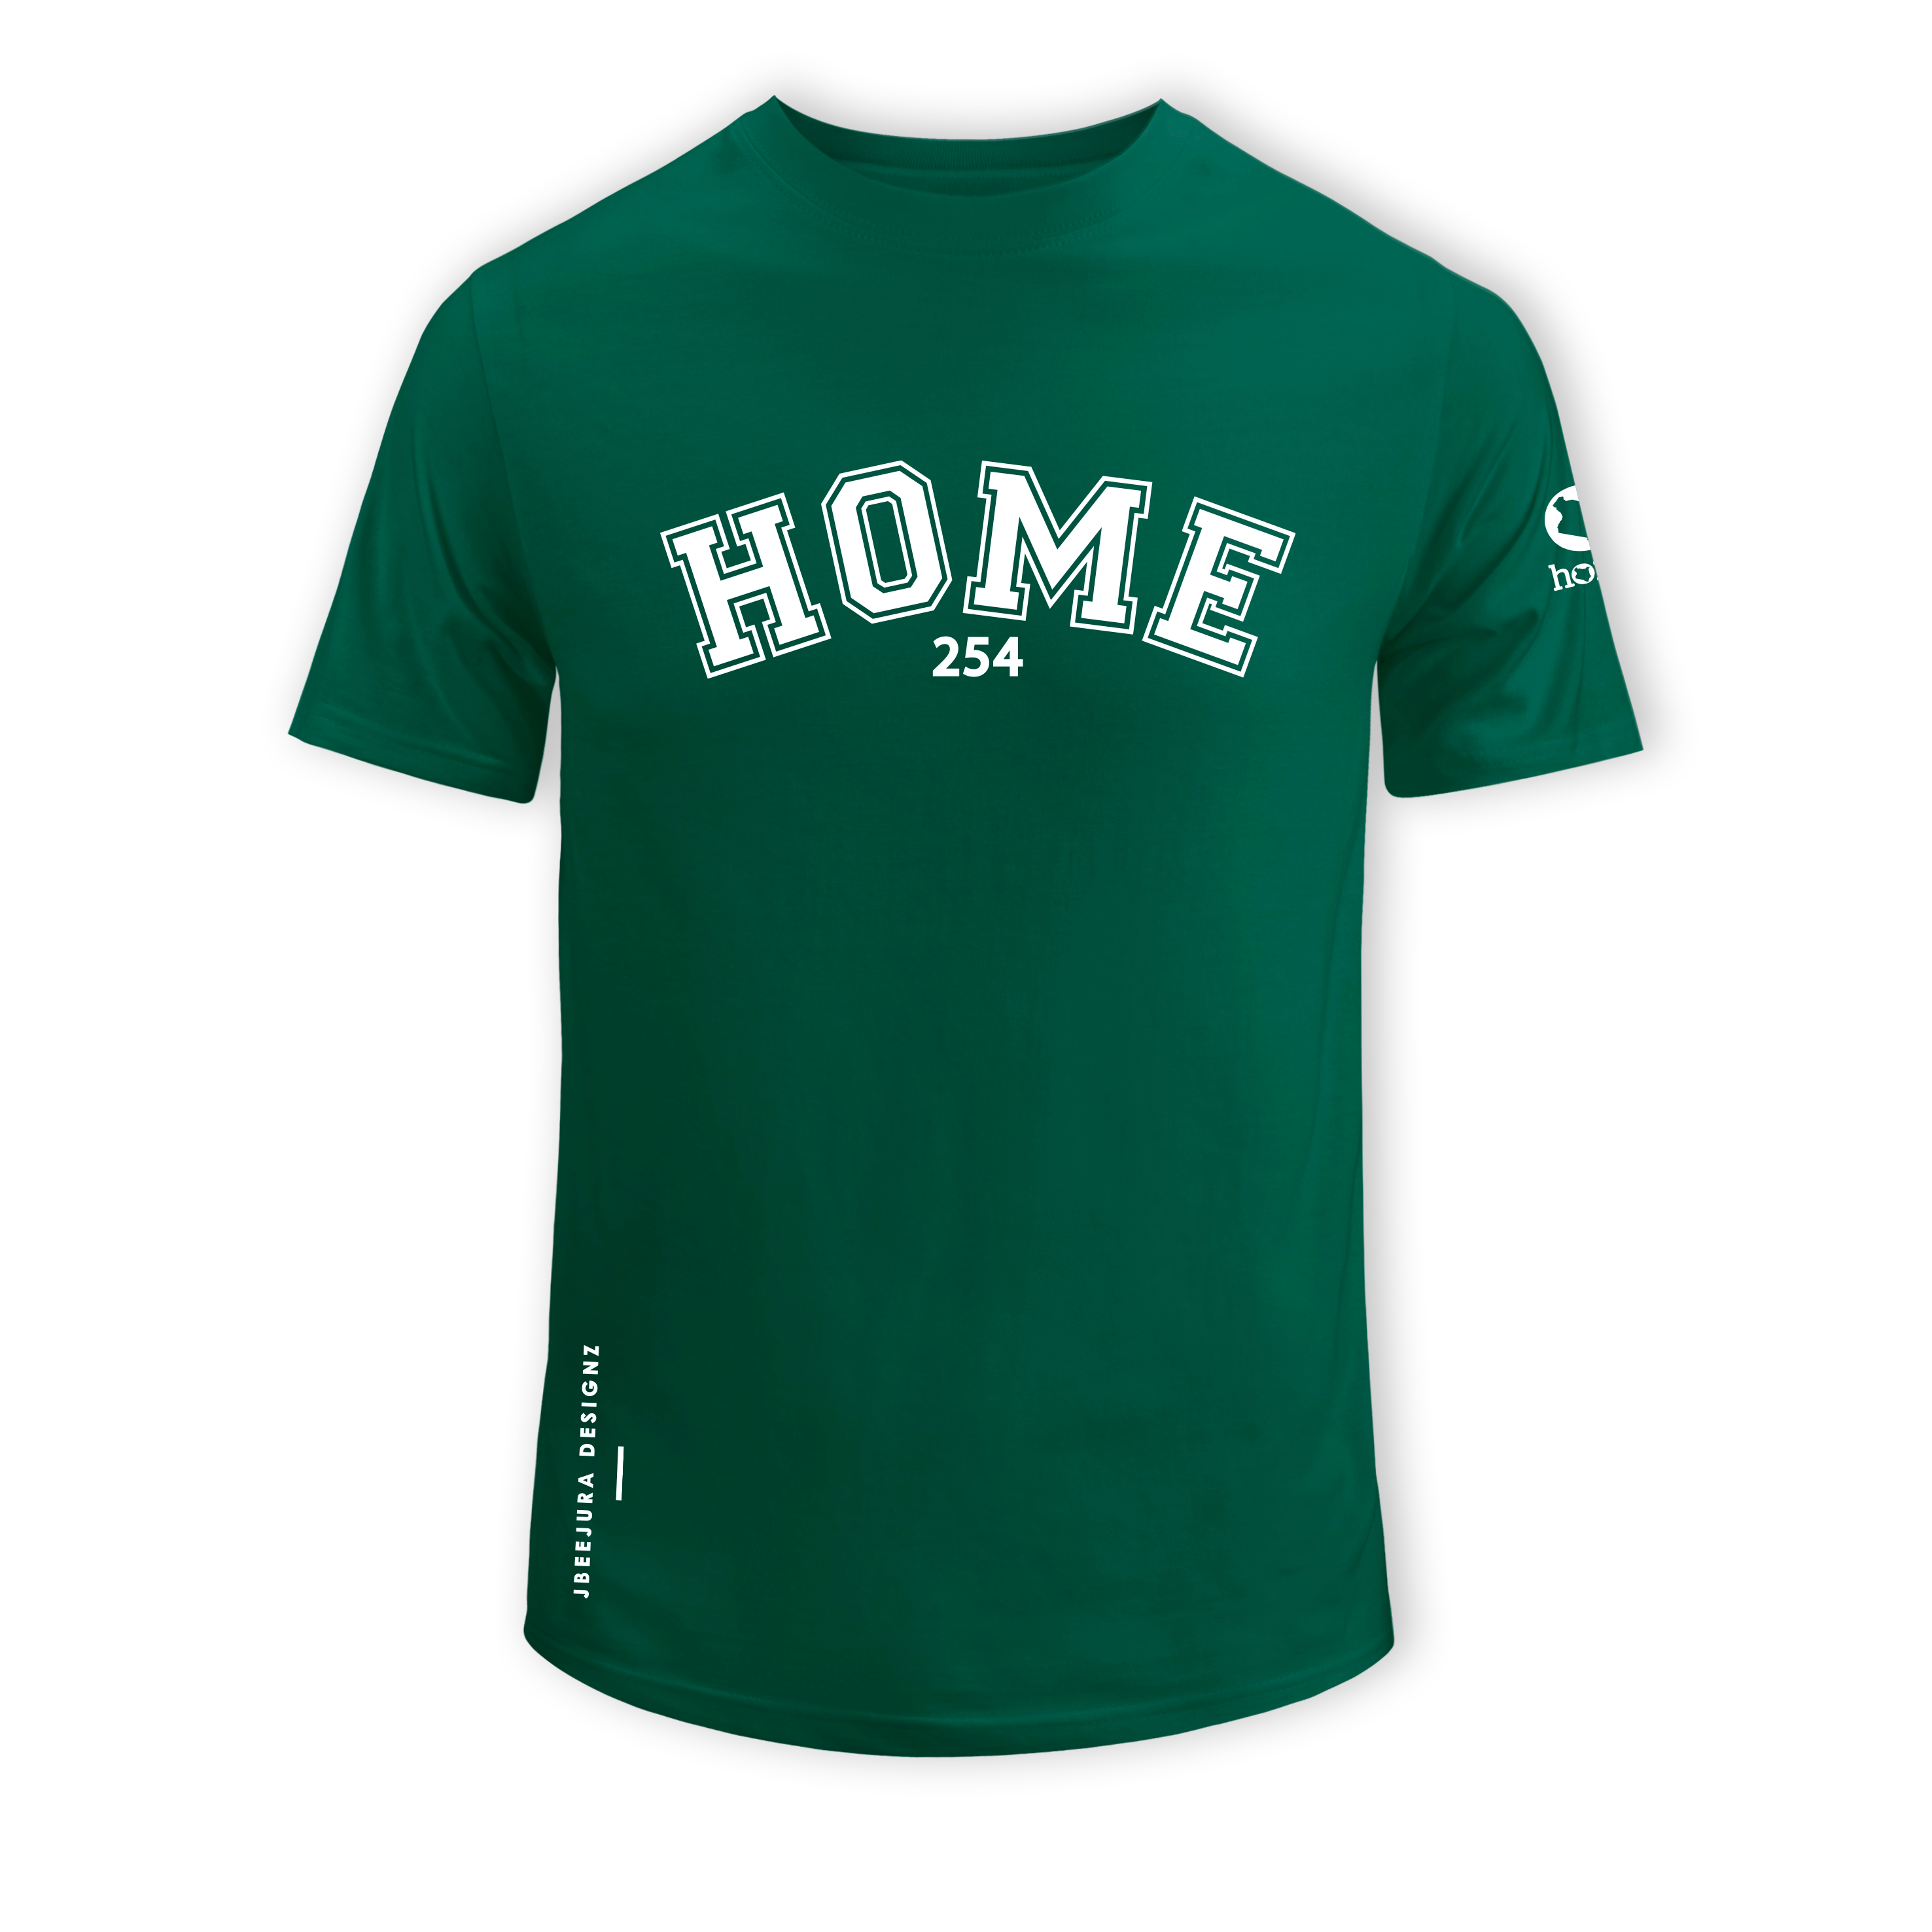 home_254 SHORT-SLEEVED RICH GREEN T-SHIRT WITH A WHITE COLLEGE PRINT – COTTON PLUS FABRIC